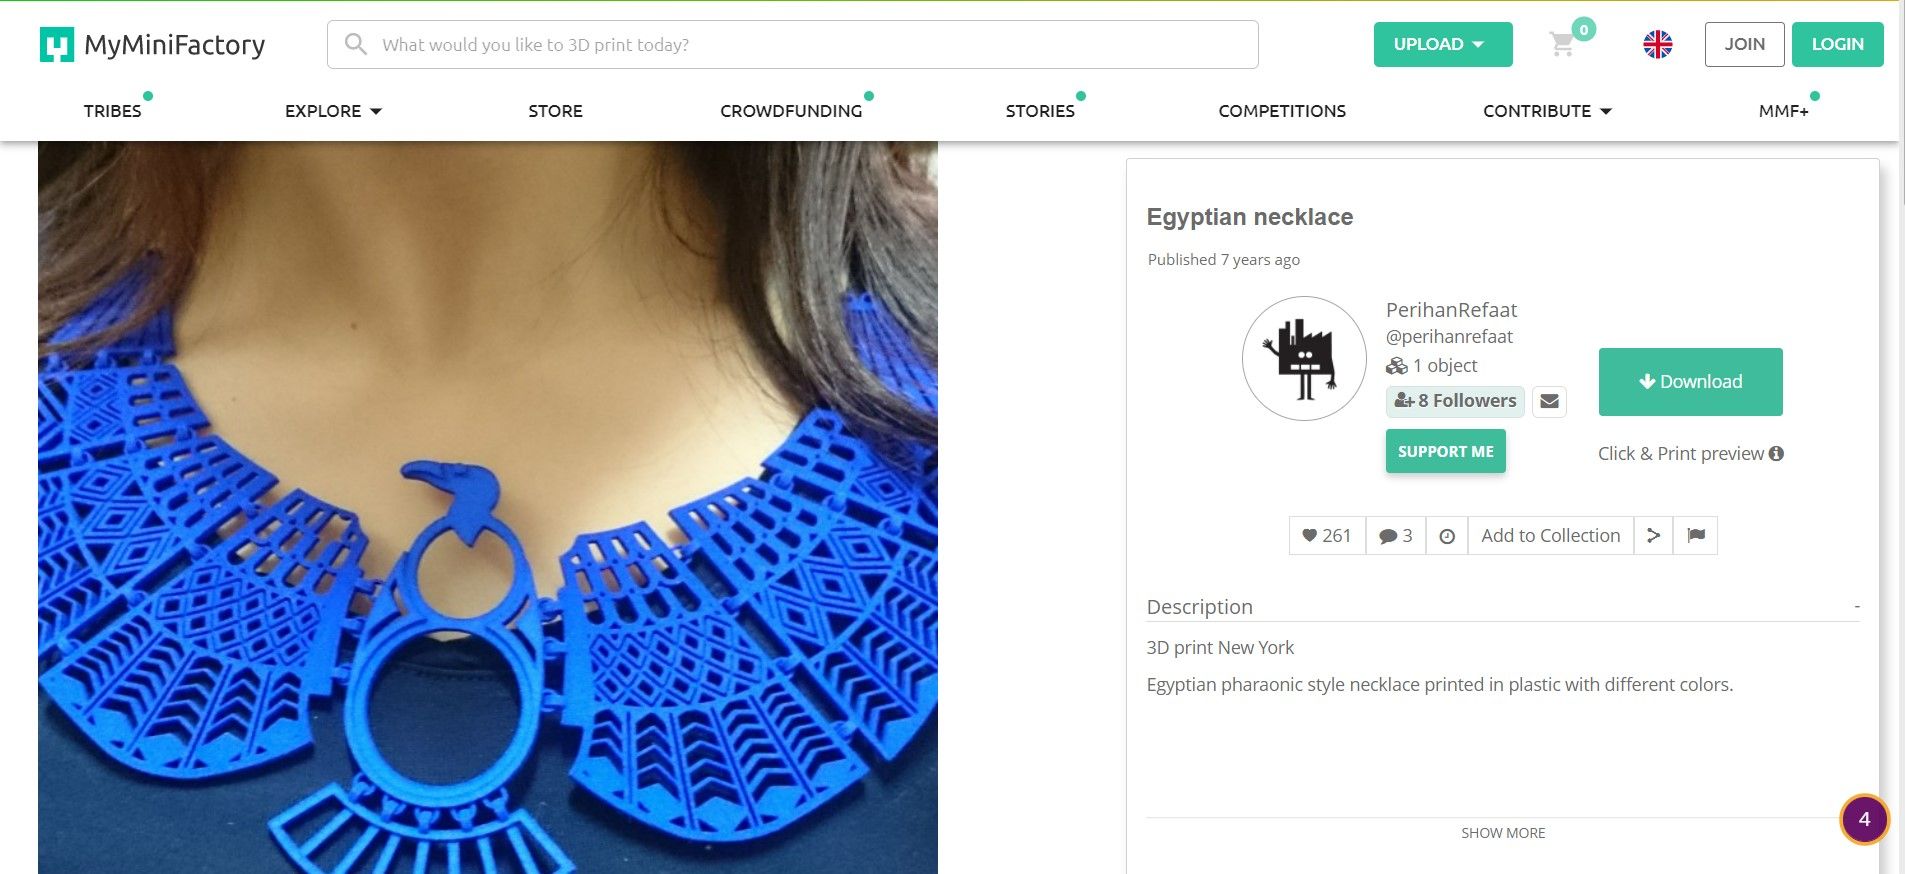 egyptian necklace 3d printed